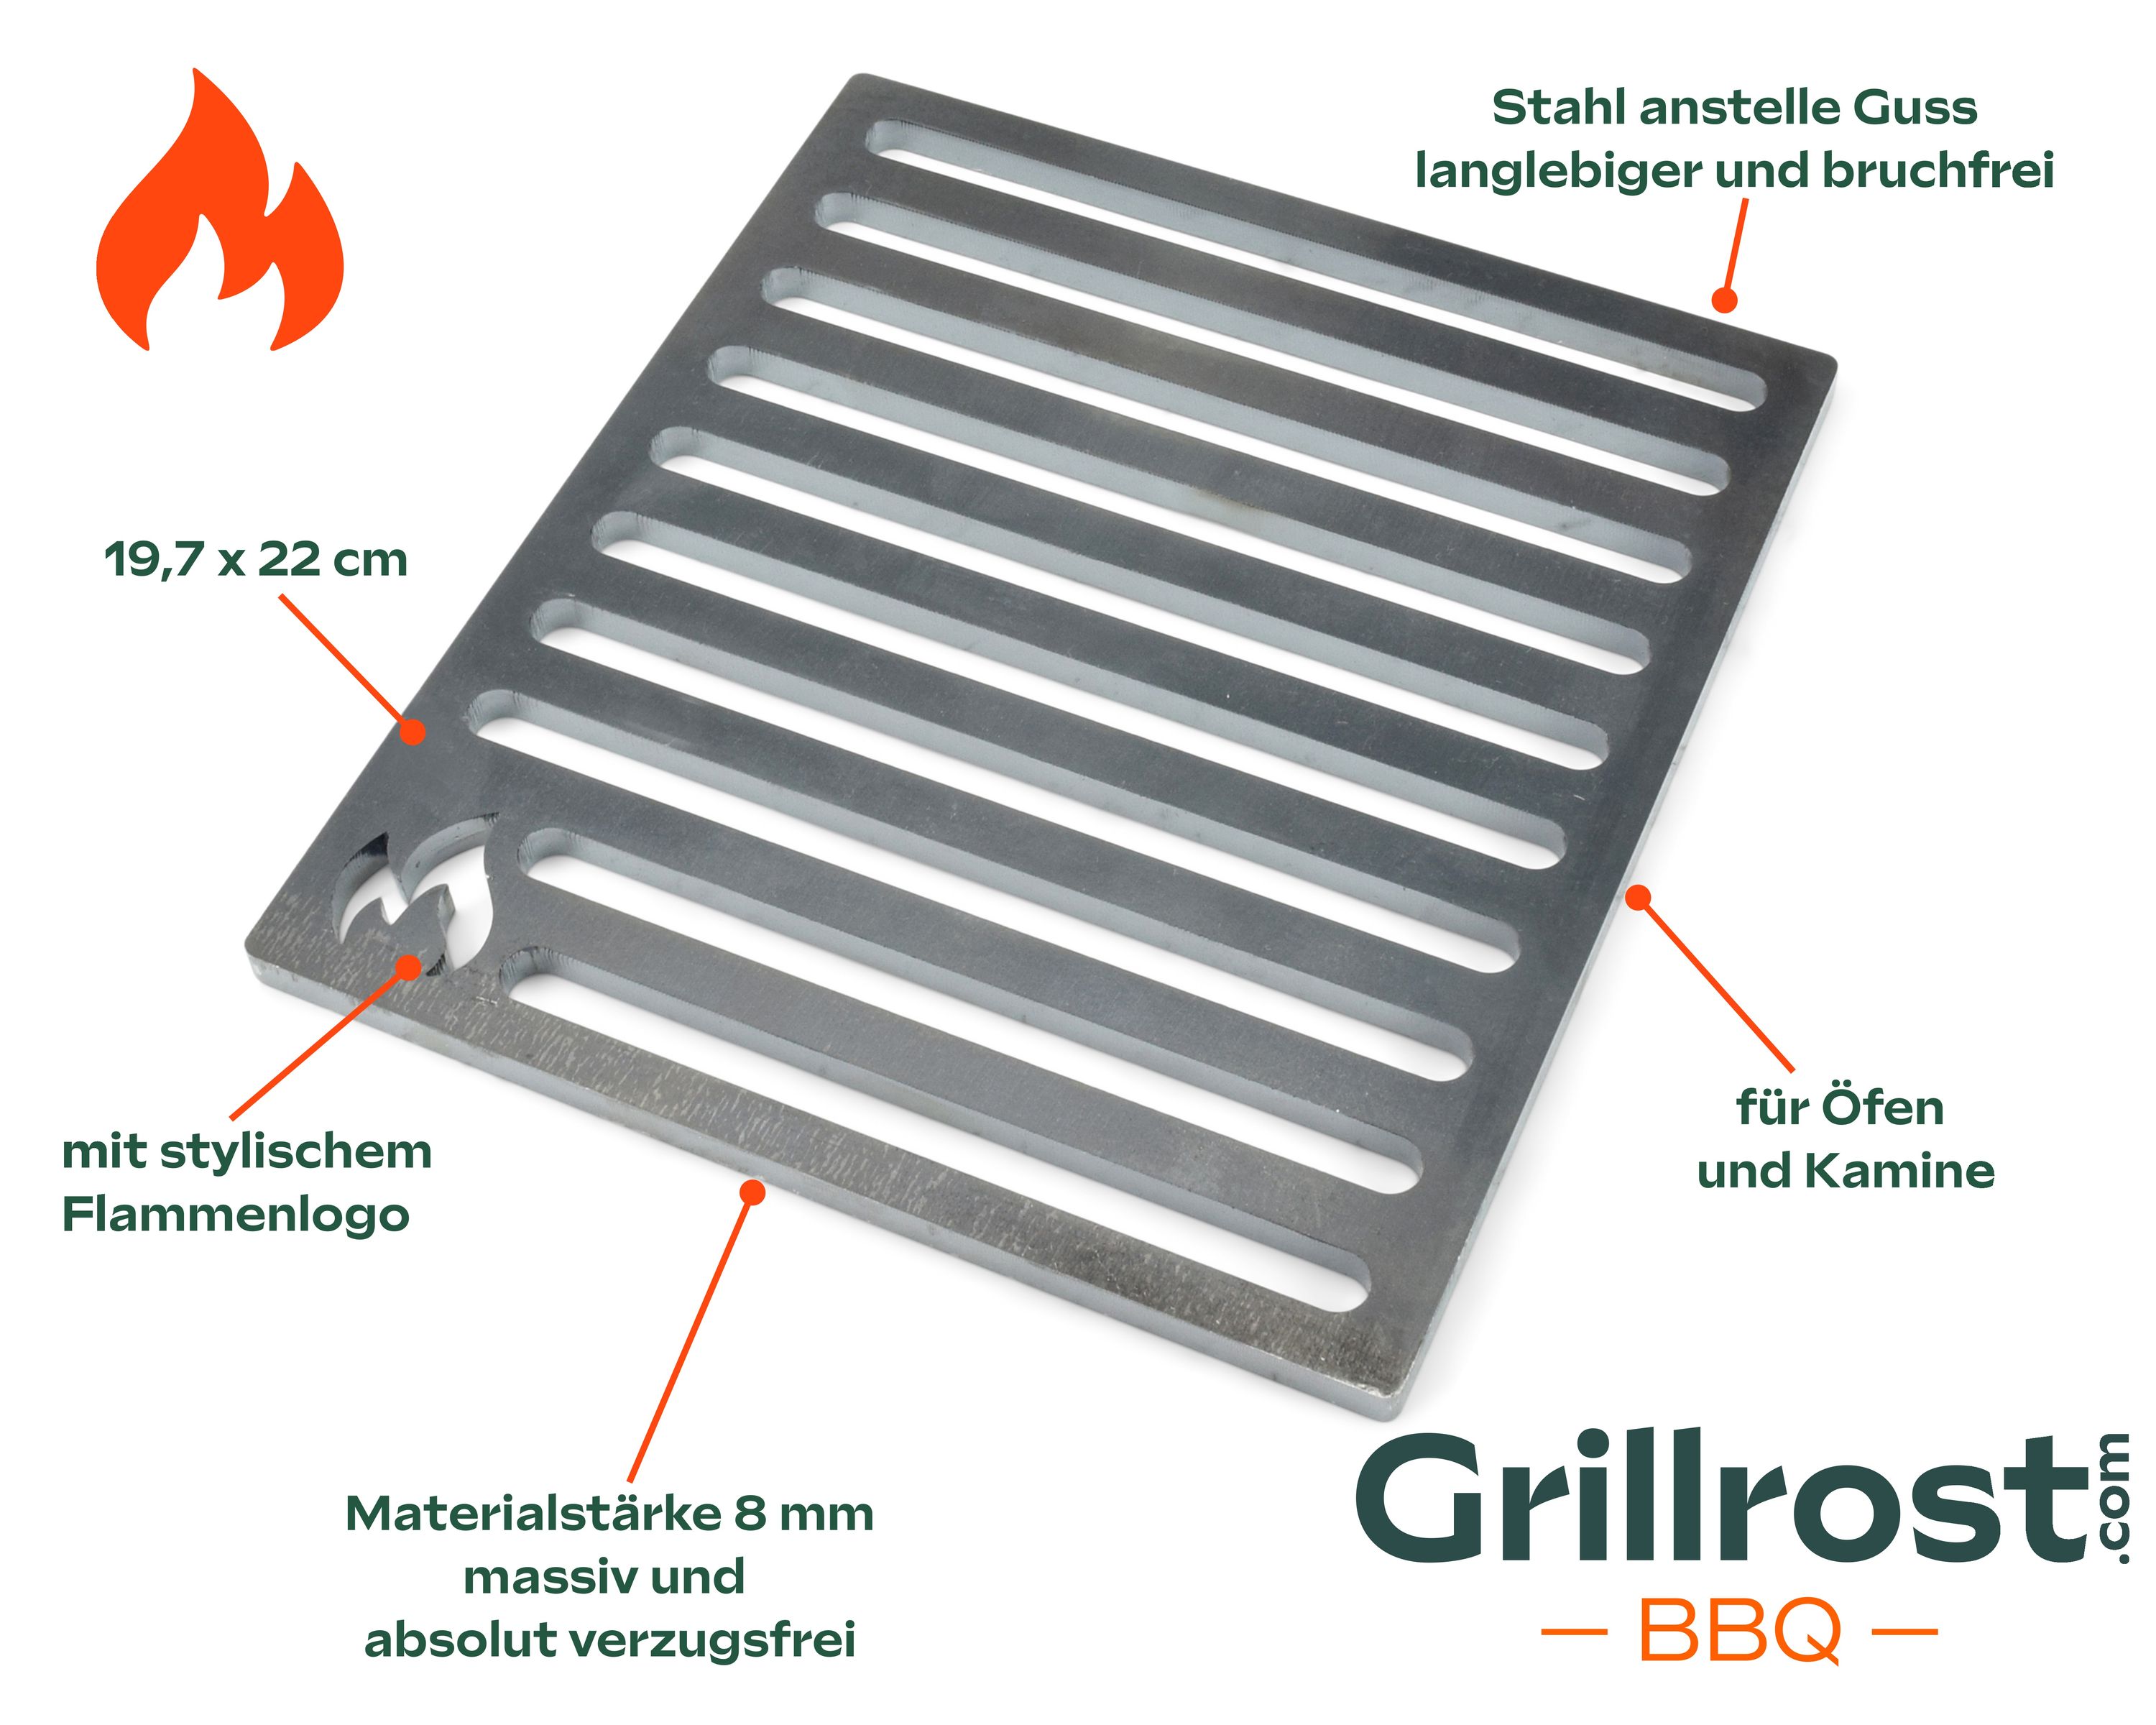 Solid steel oven grate more durable than cast iron grates - for stoves and fireplaces